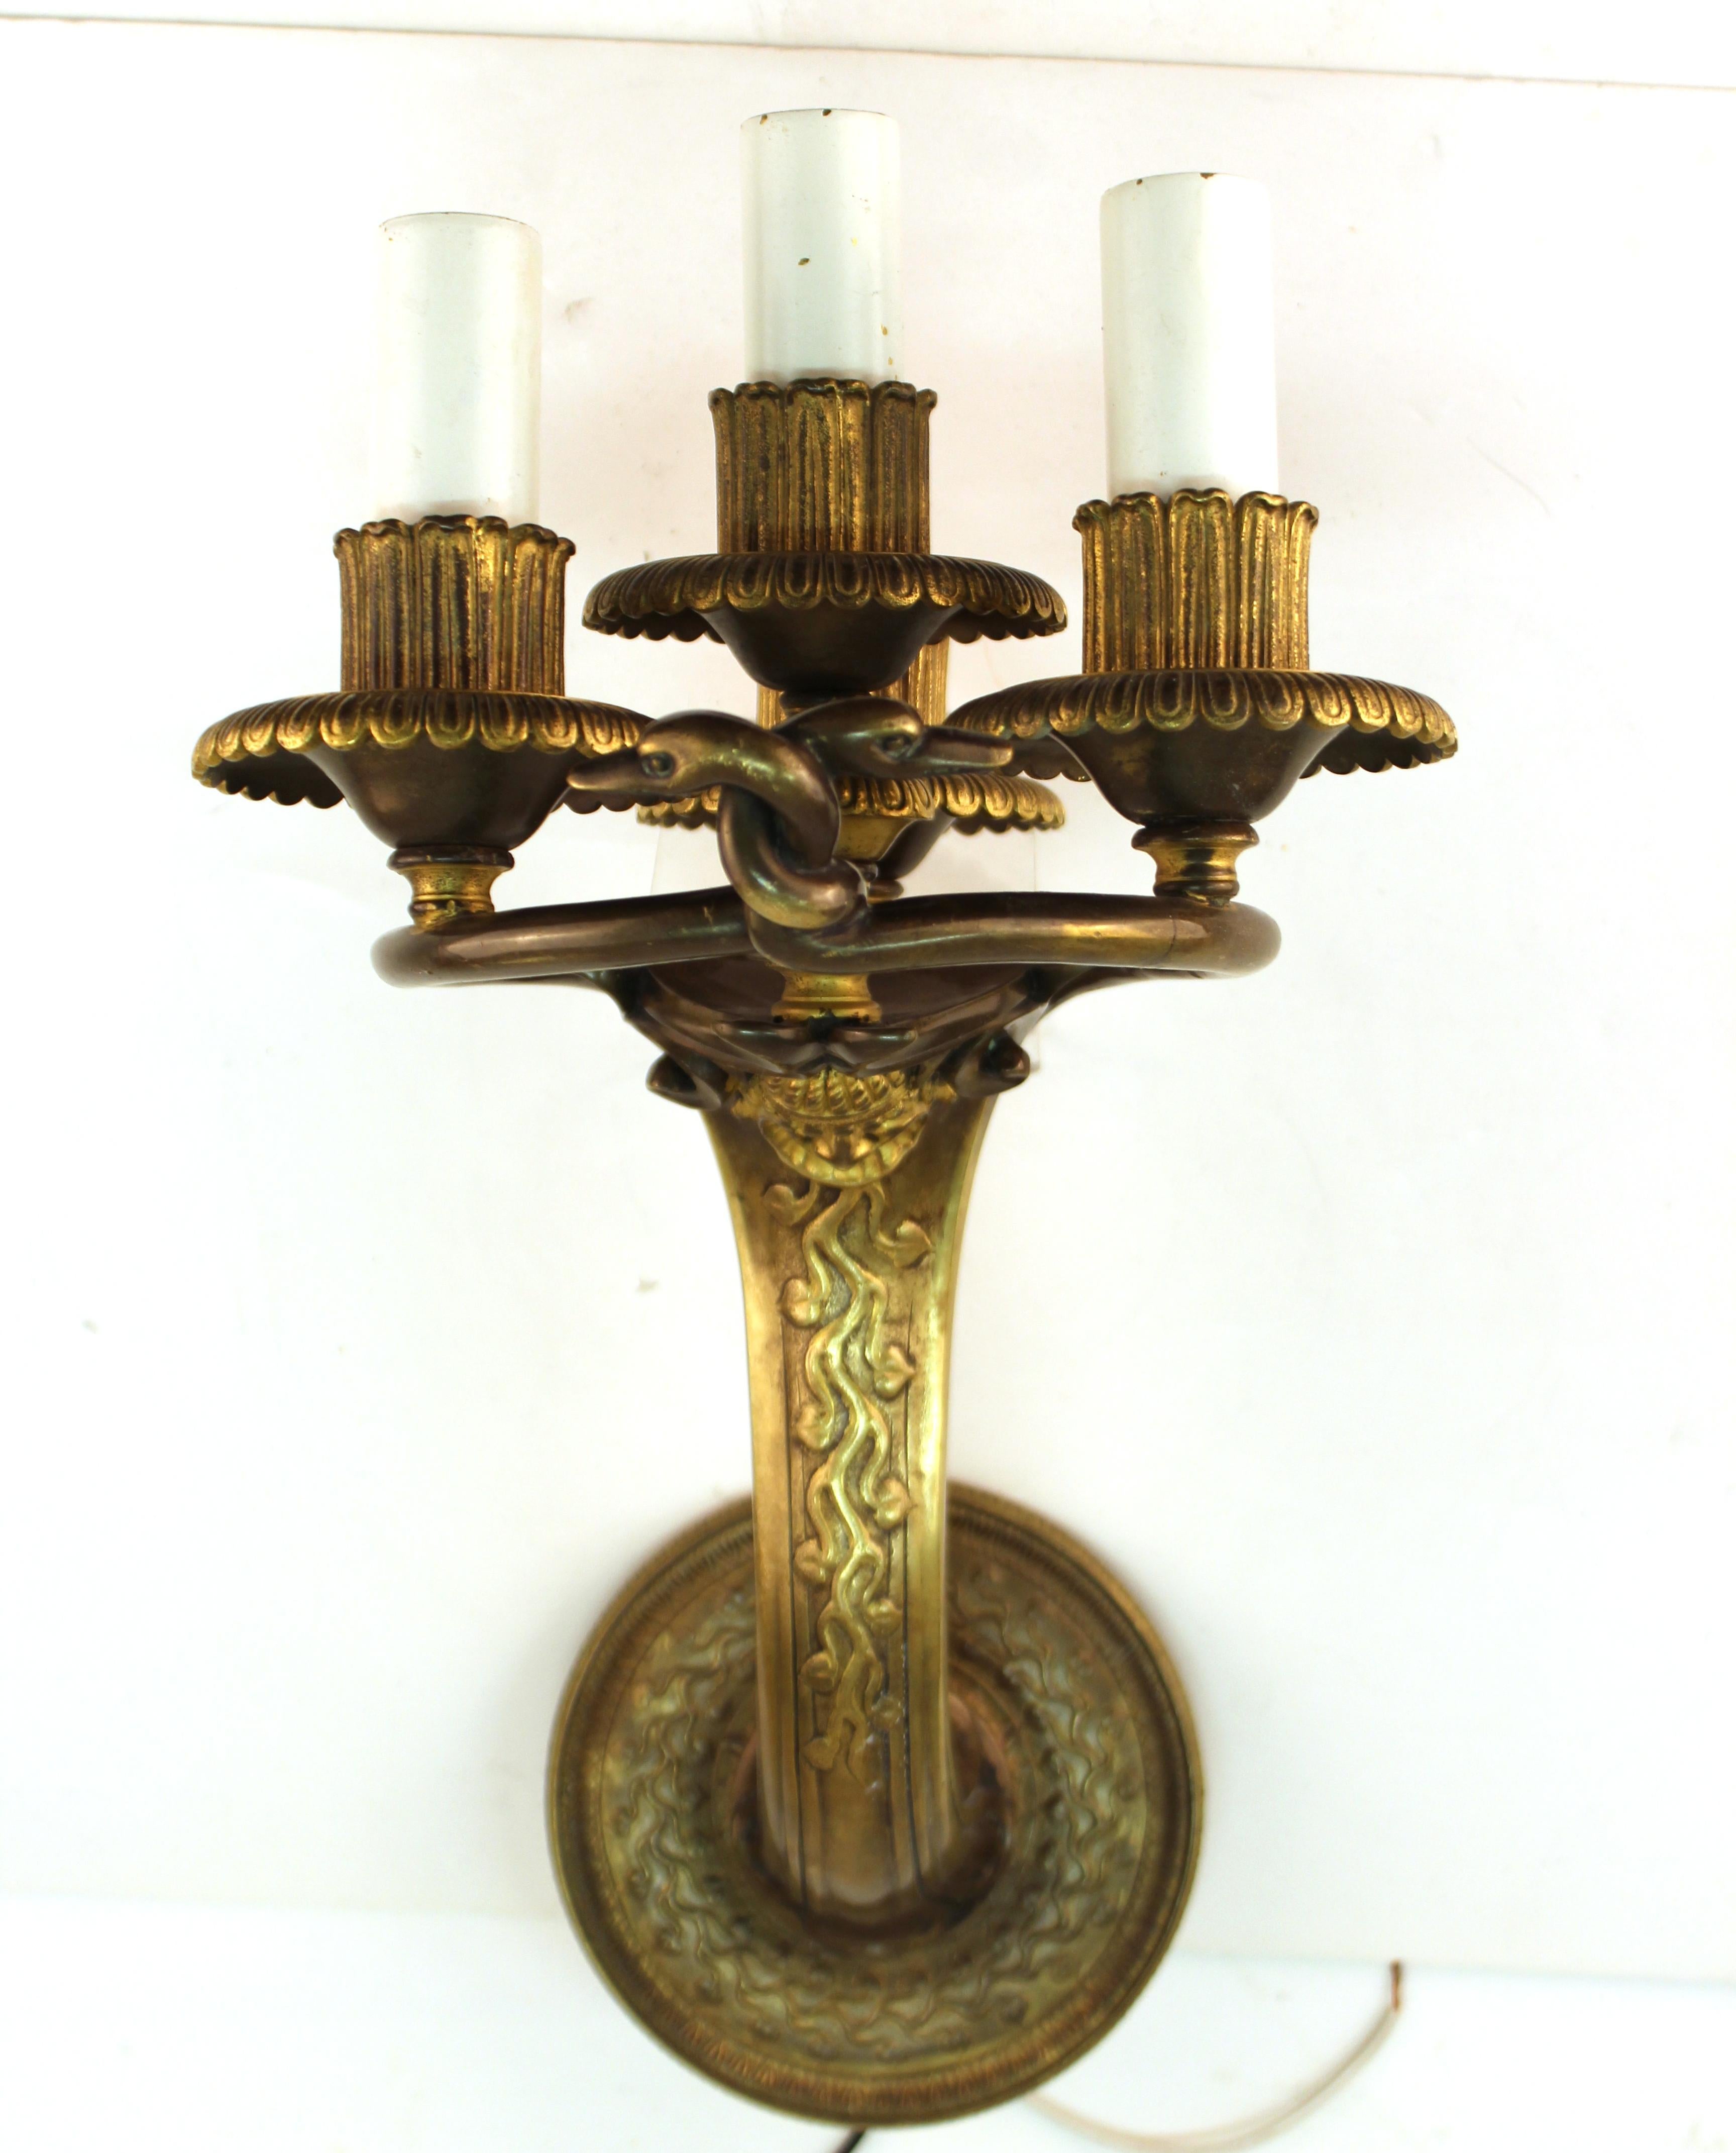 American neoclassical revival pair of patinated gilt bronze sconces created by Edward F. Caldwell & Co. in New York City, possibly for a theatre. The pair dates from the circa 1910s and has a Caldwell mark on the backside. In great vintage condition